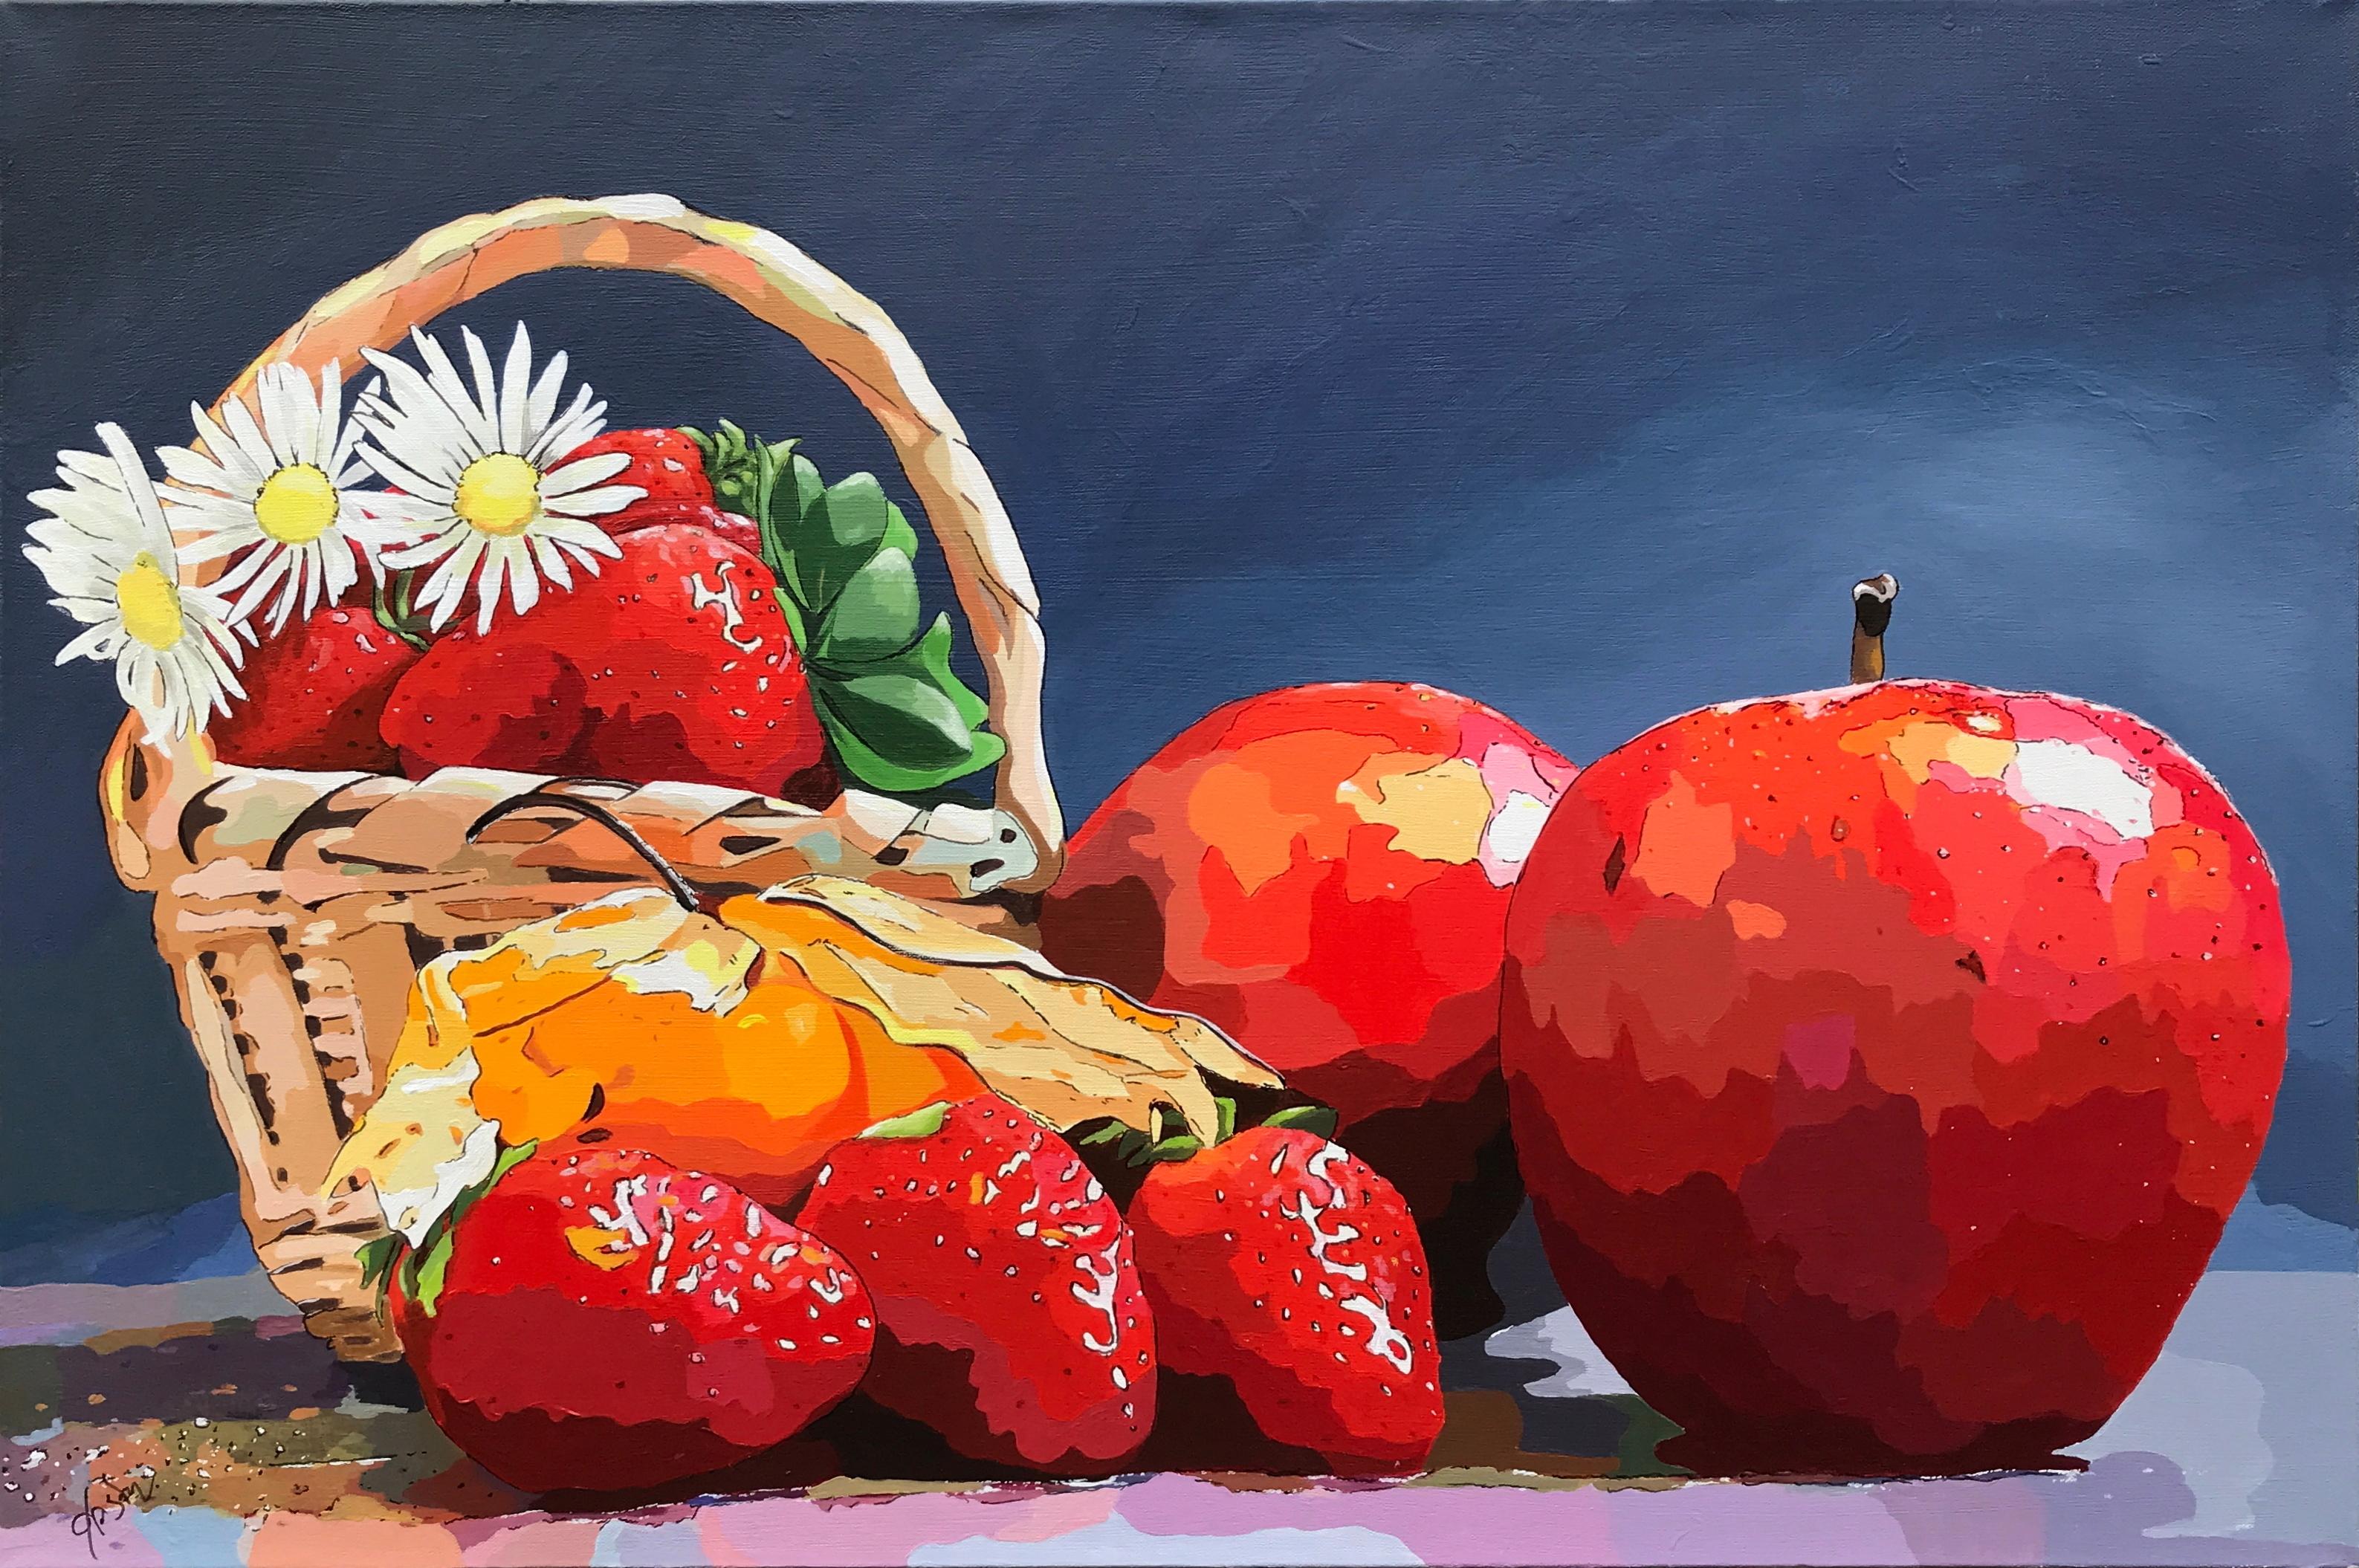 Apples and Strawberries, Original Painting - Art by John Jaster